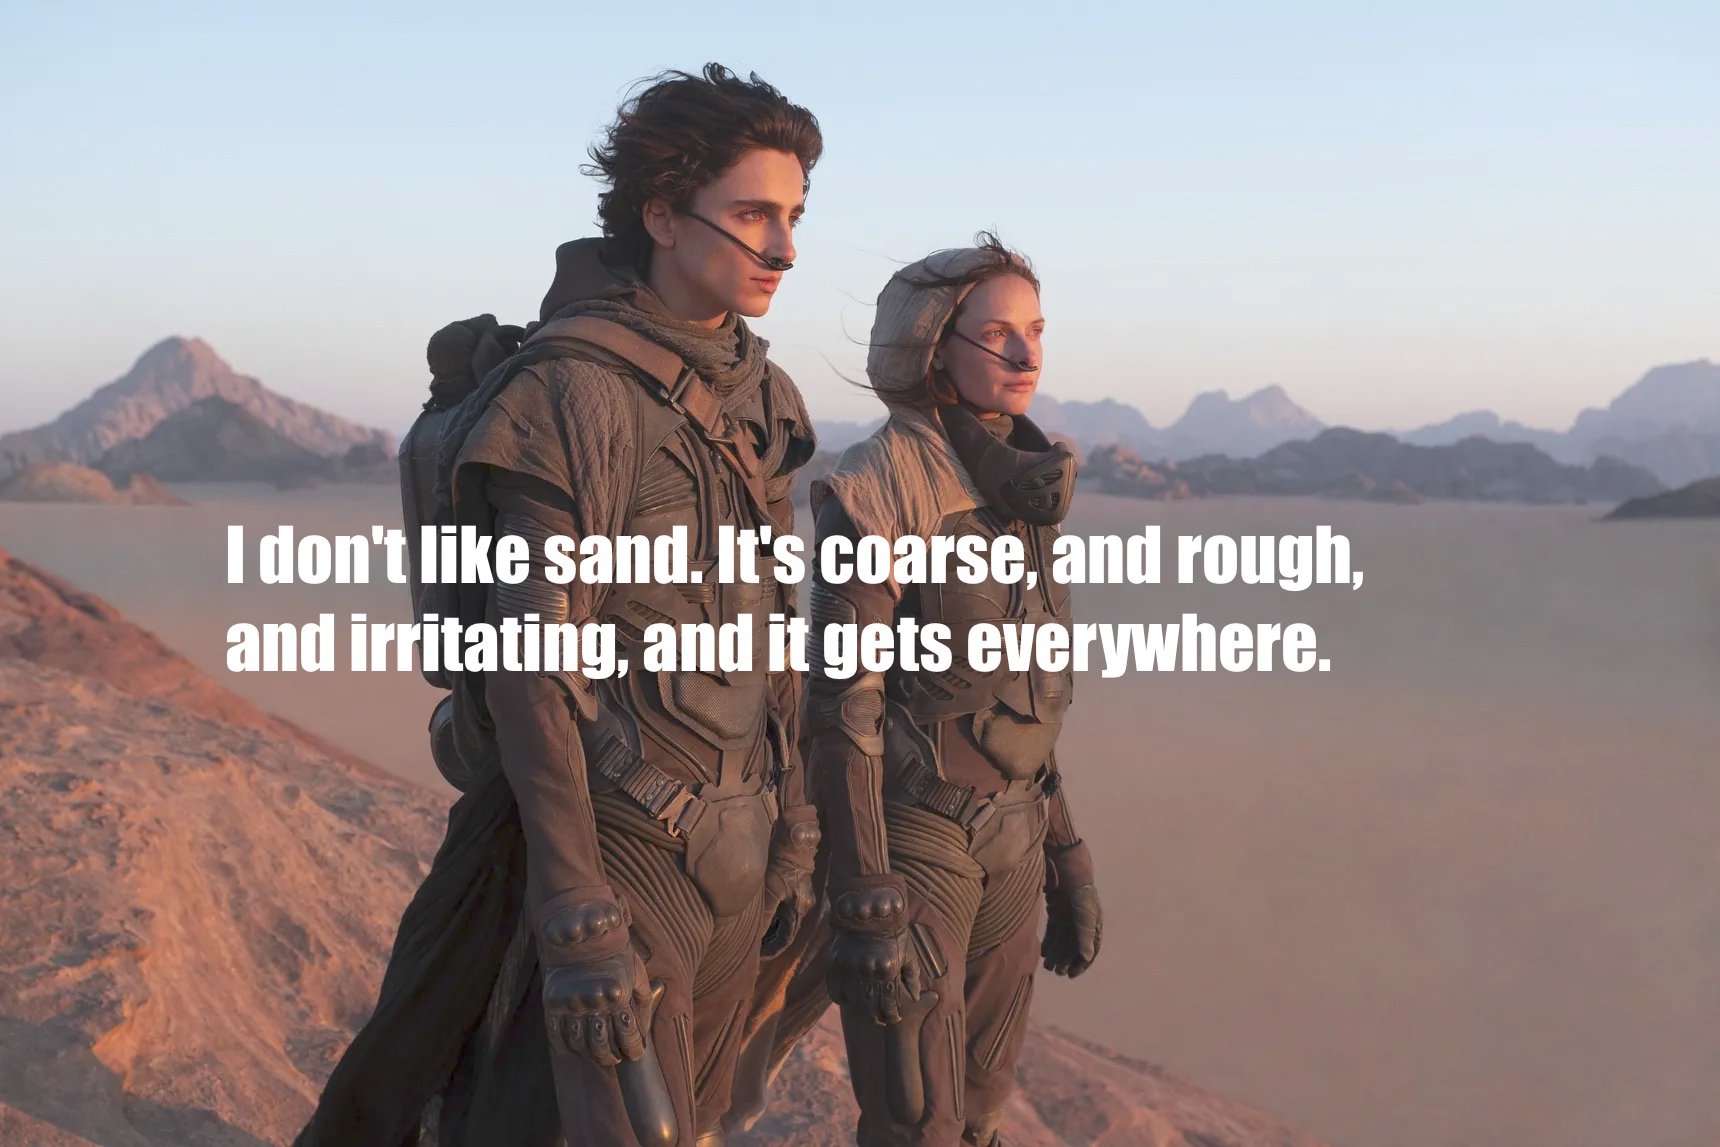 dune memes  - dune 2020 - I don't sand. It's coarse, and rough, and irritating, and it gets everywhere.